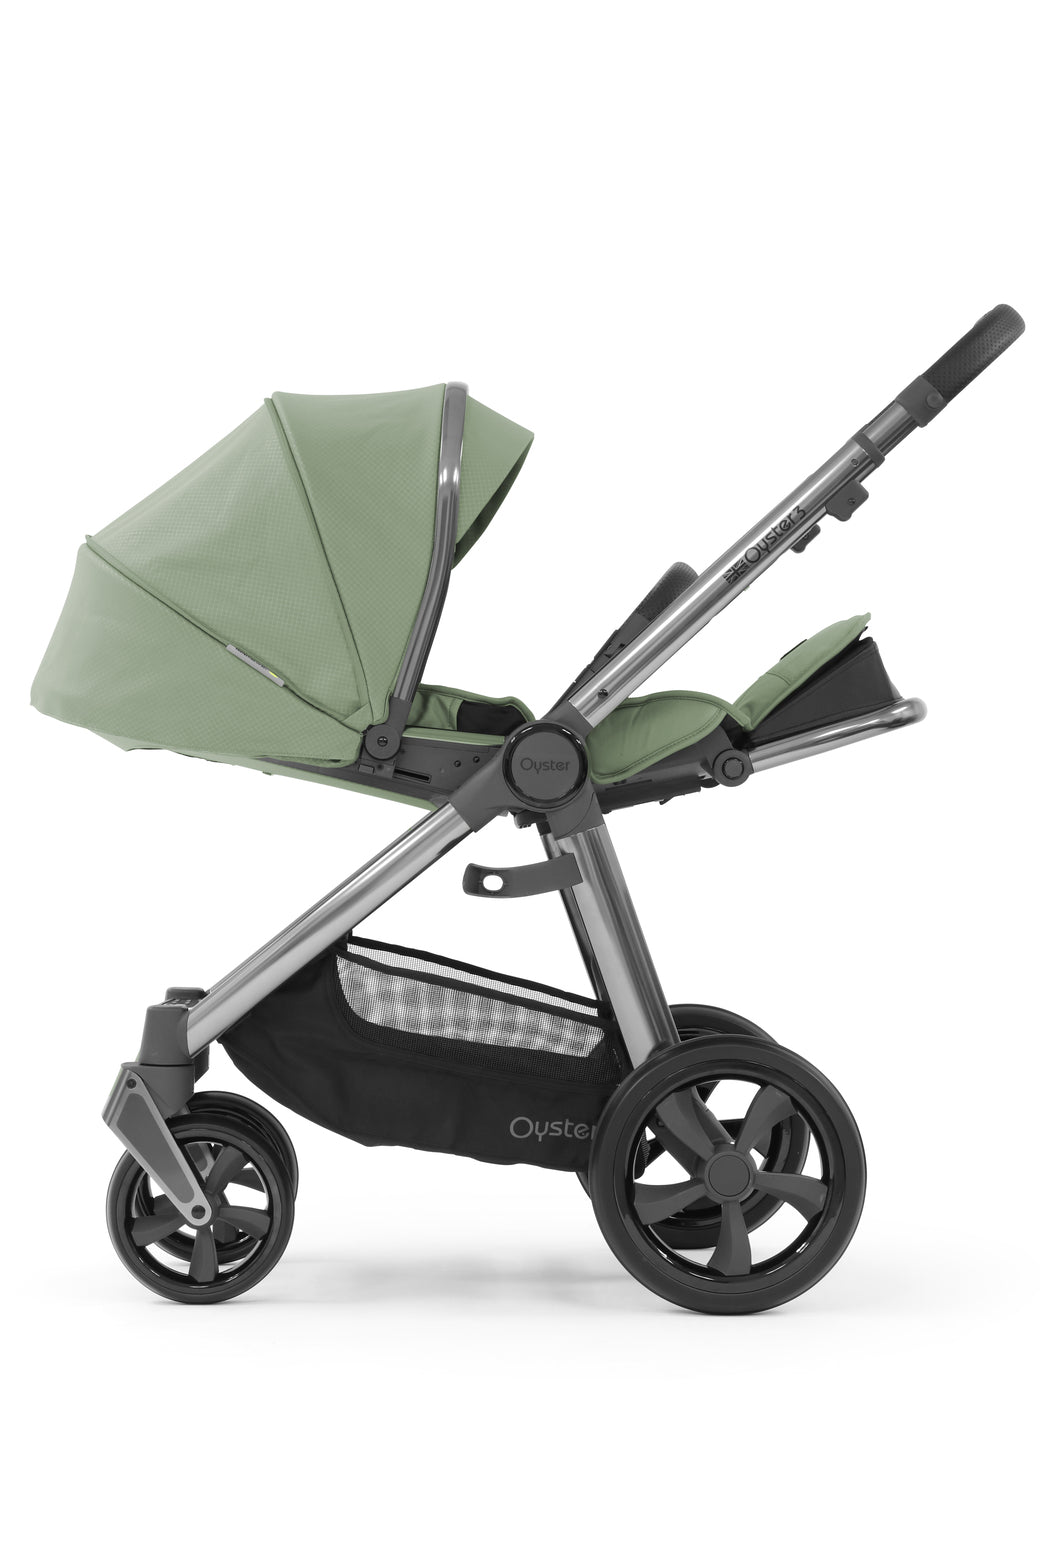 Babystyle Oyster 3 Essential 5 Piece Travel System Bundle With Carbriofix - Spearmint - For Your Little One